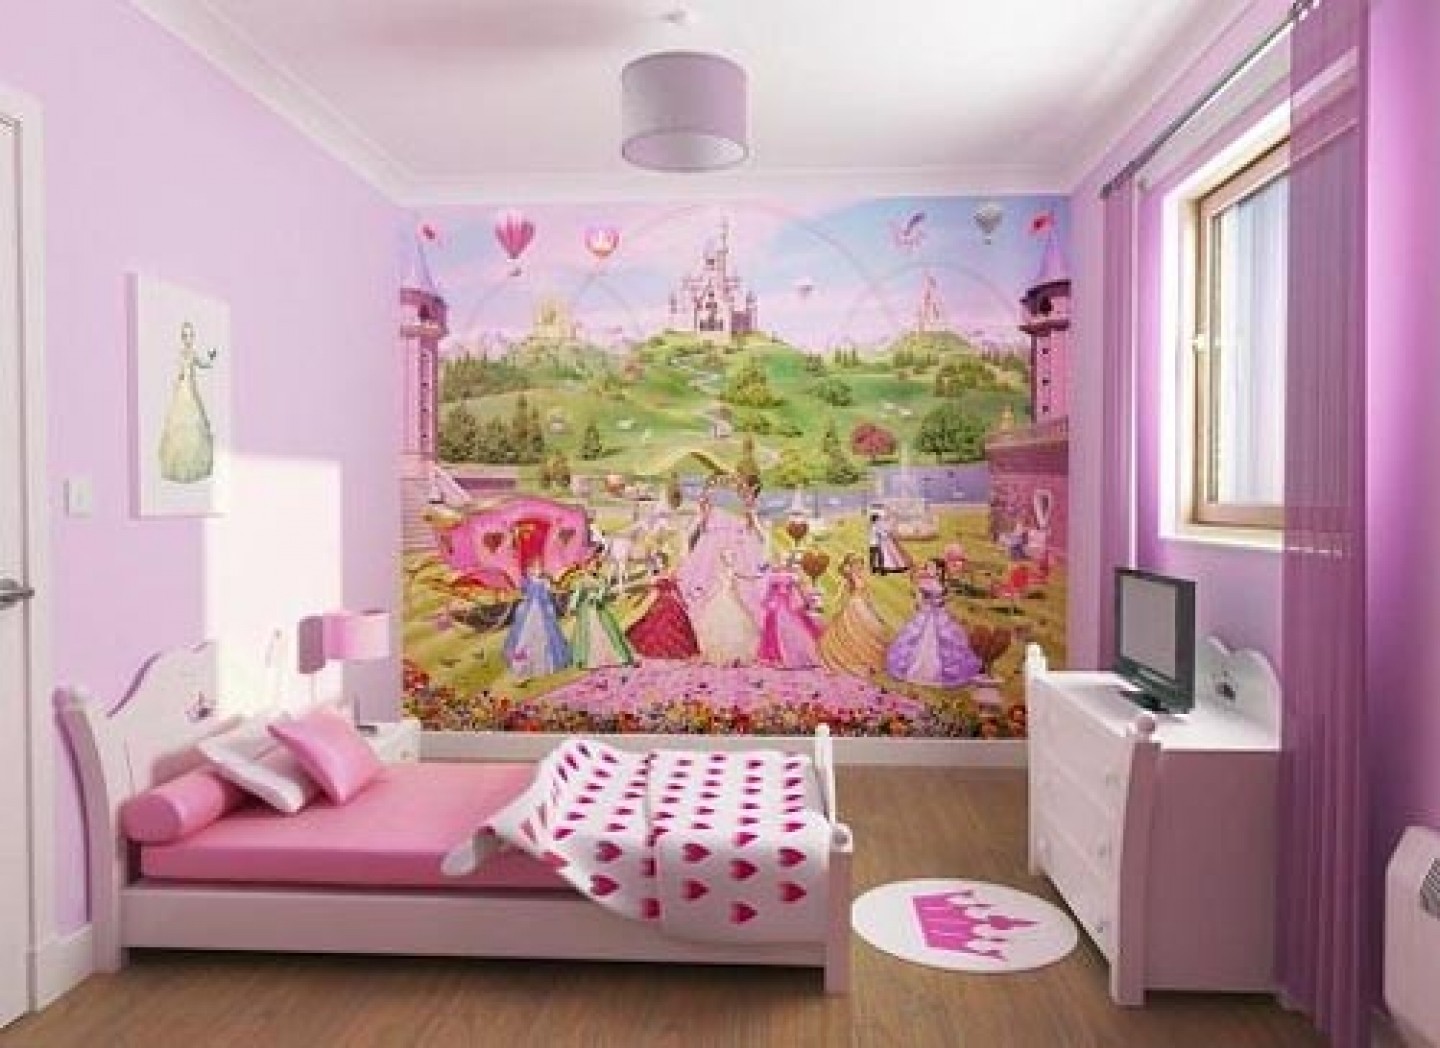 Bedroom Decorating Ideas For Toddlers